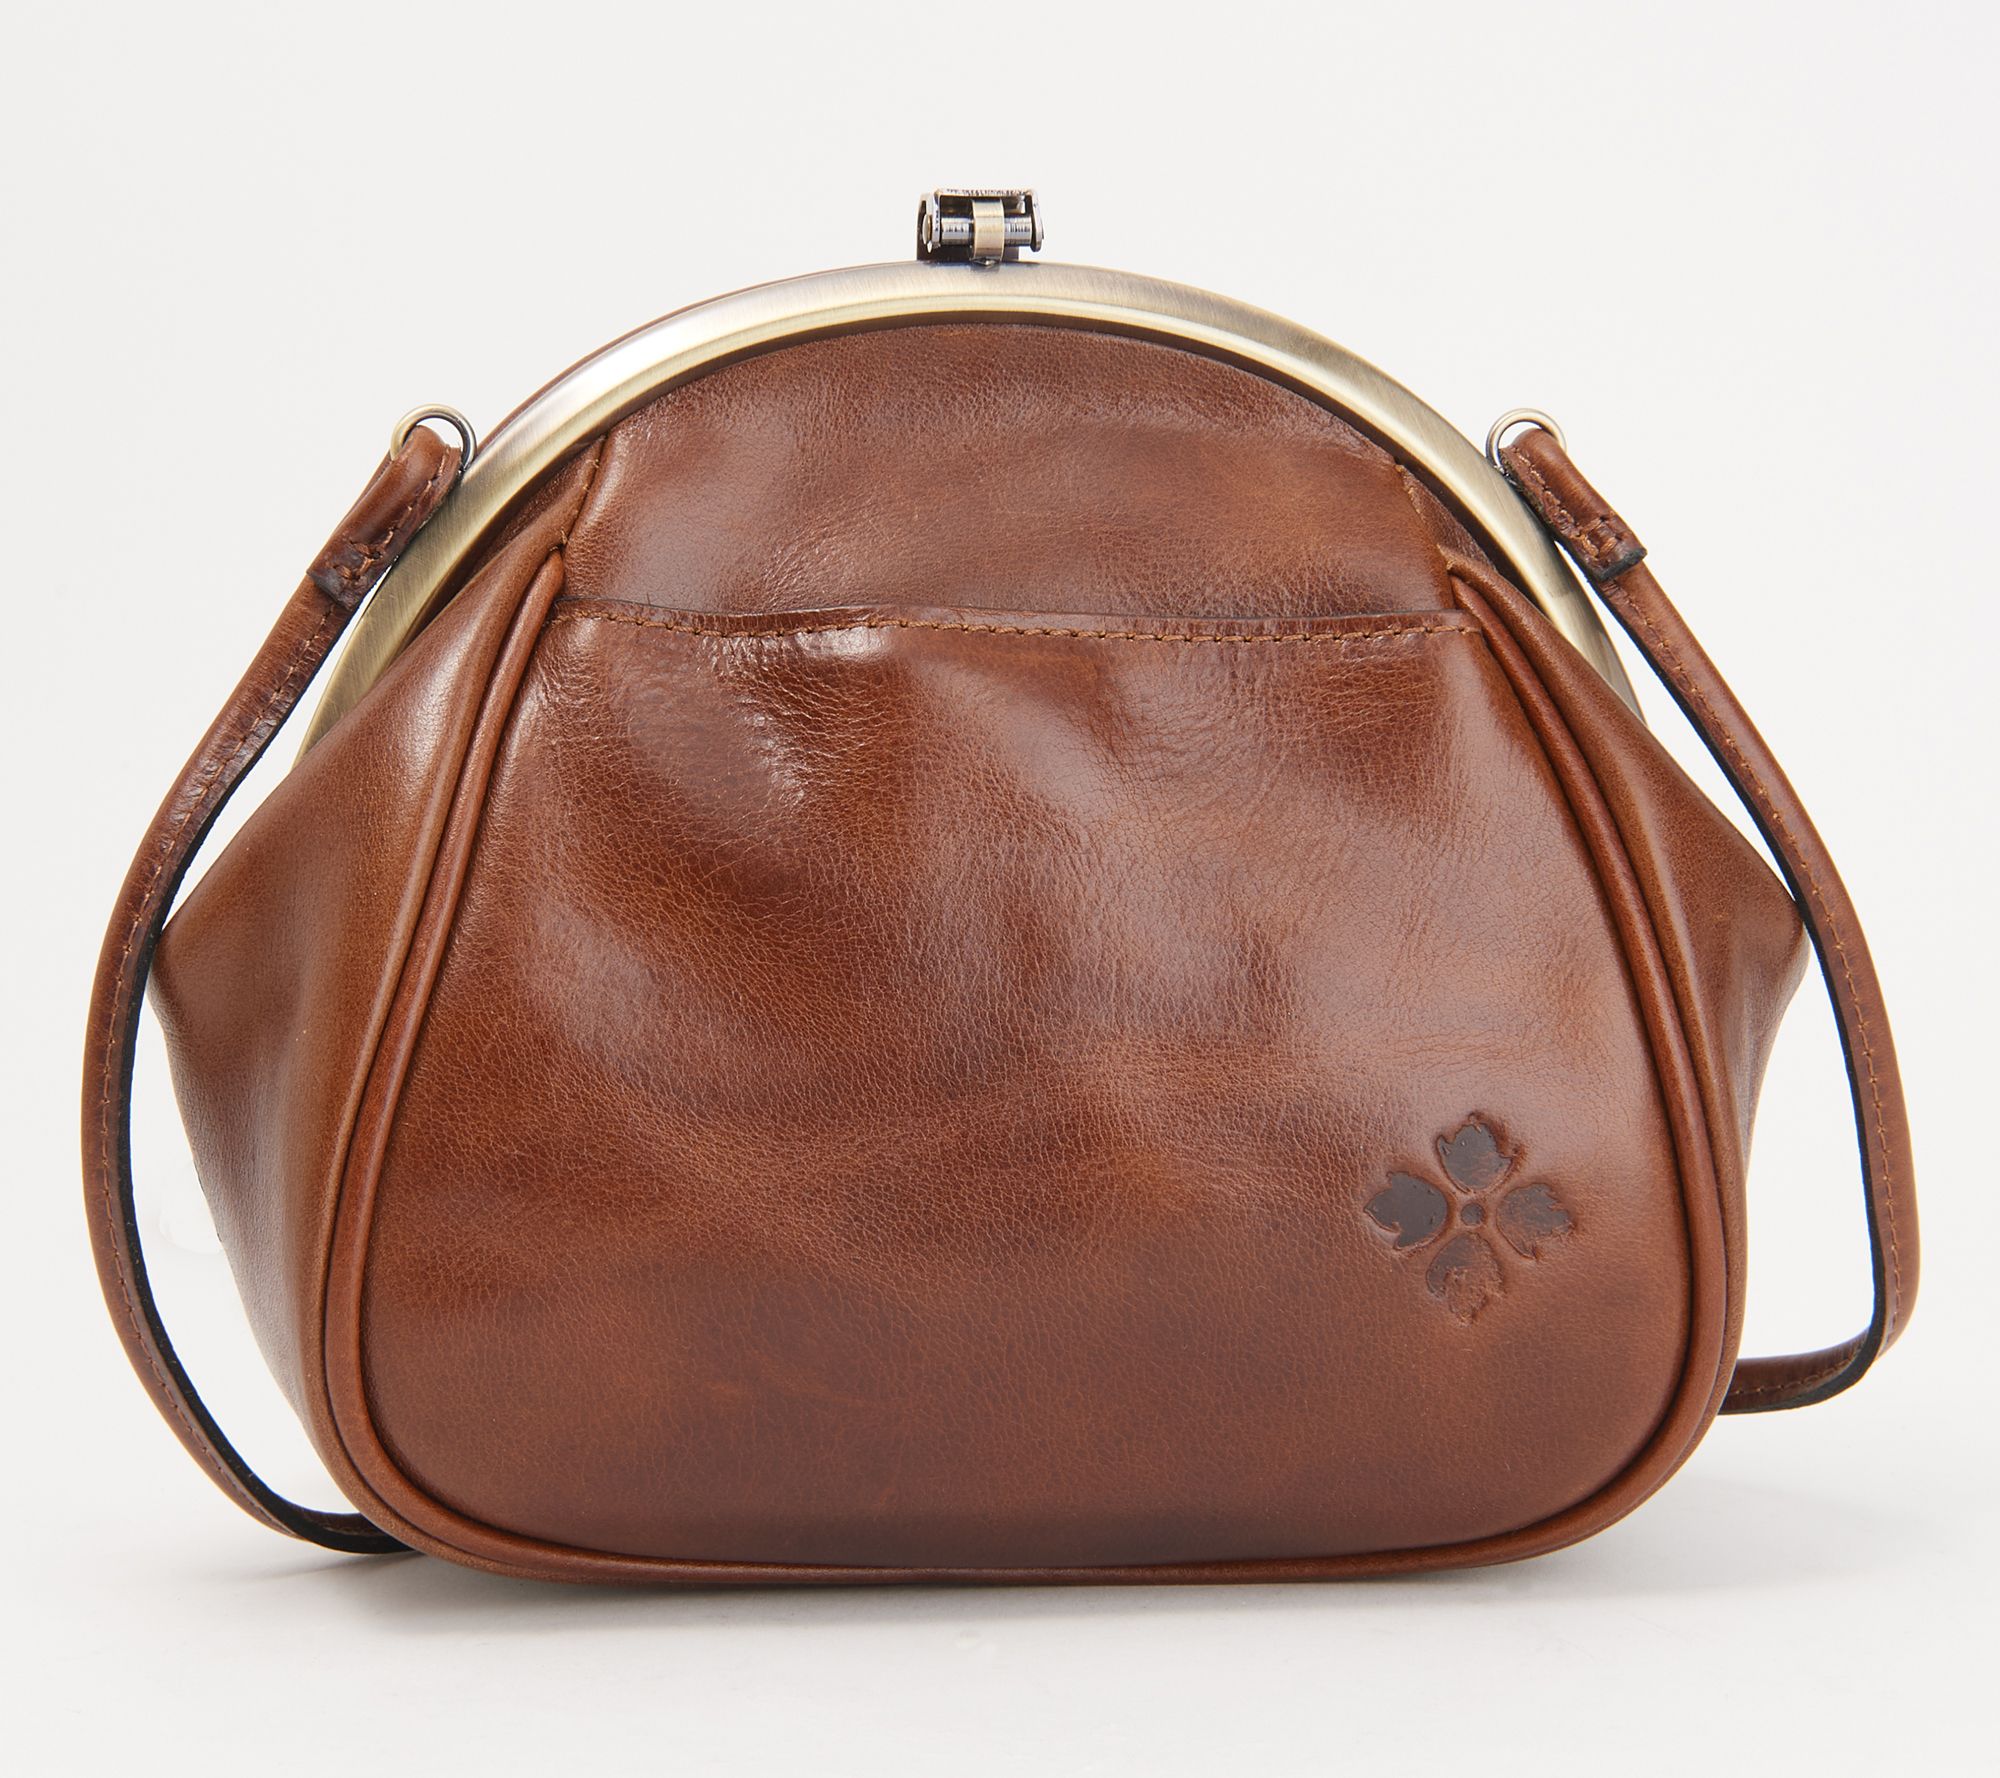 Added On Leather Loops On The Sides of Louis Vuitton Purse to attach a  crossbody strap when desired. - Yelp